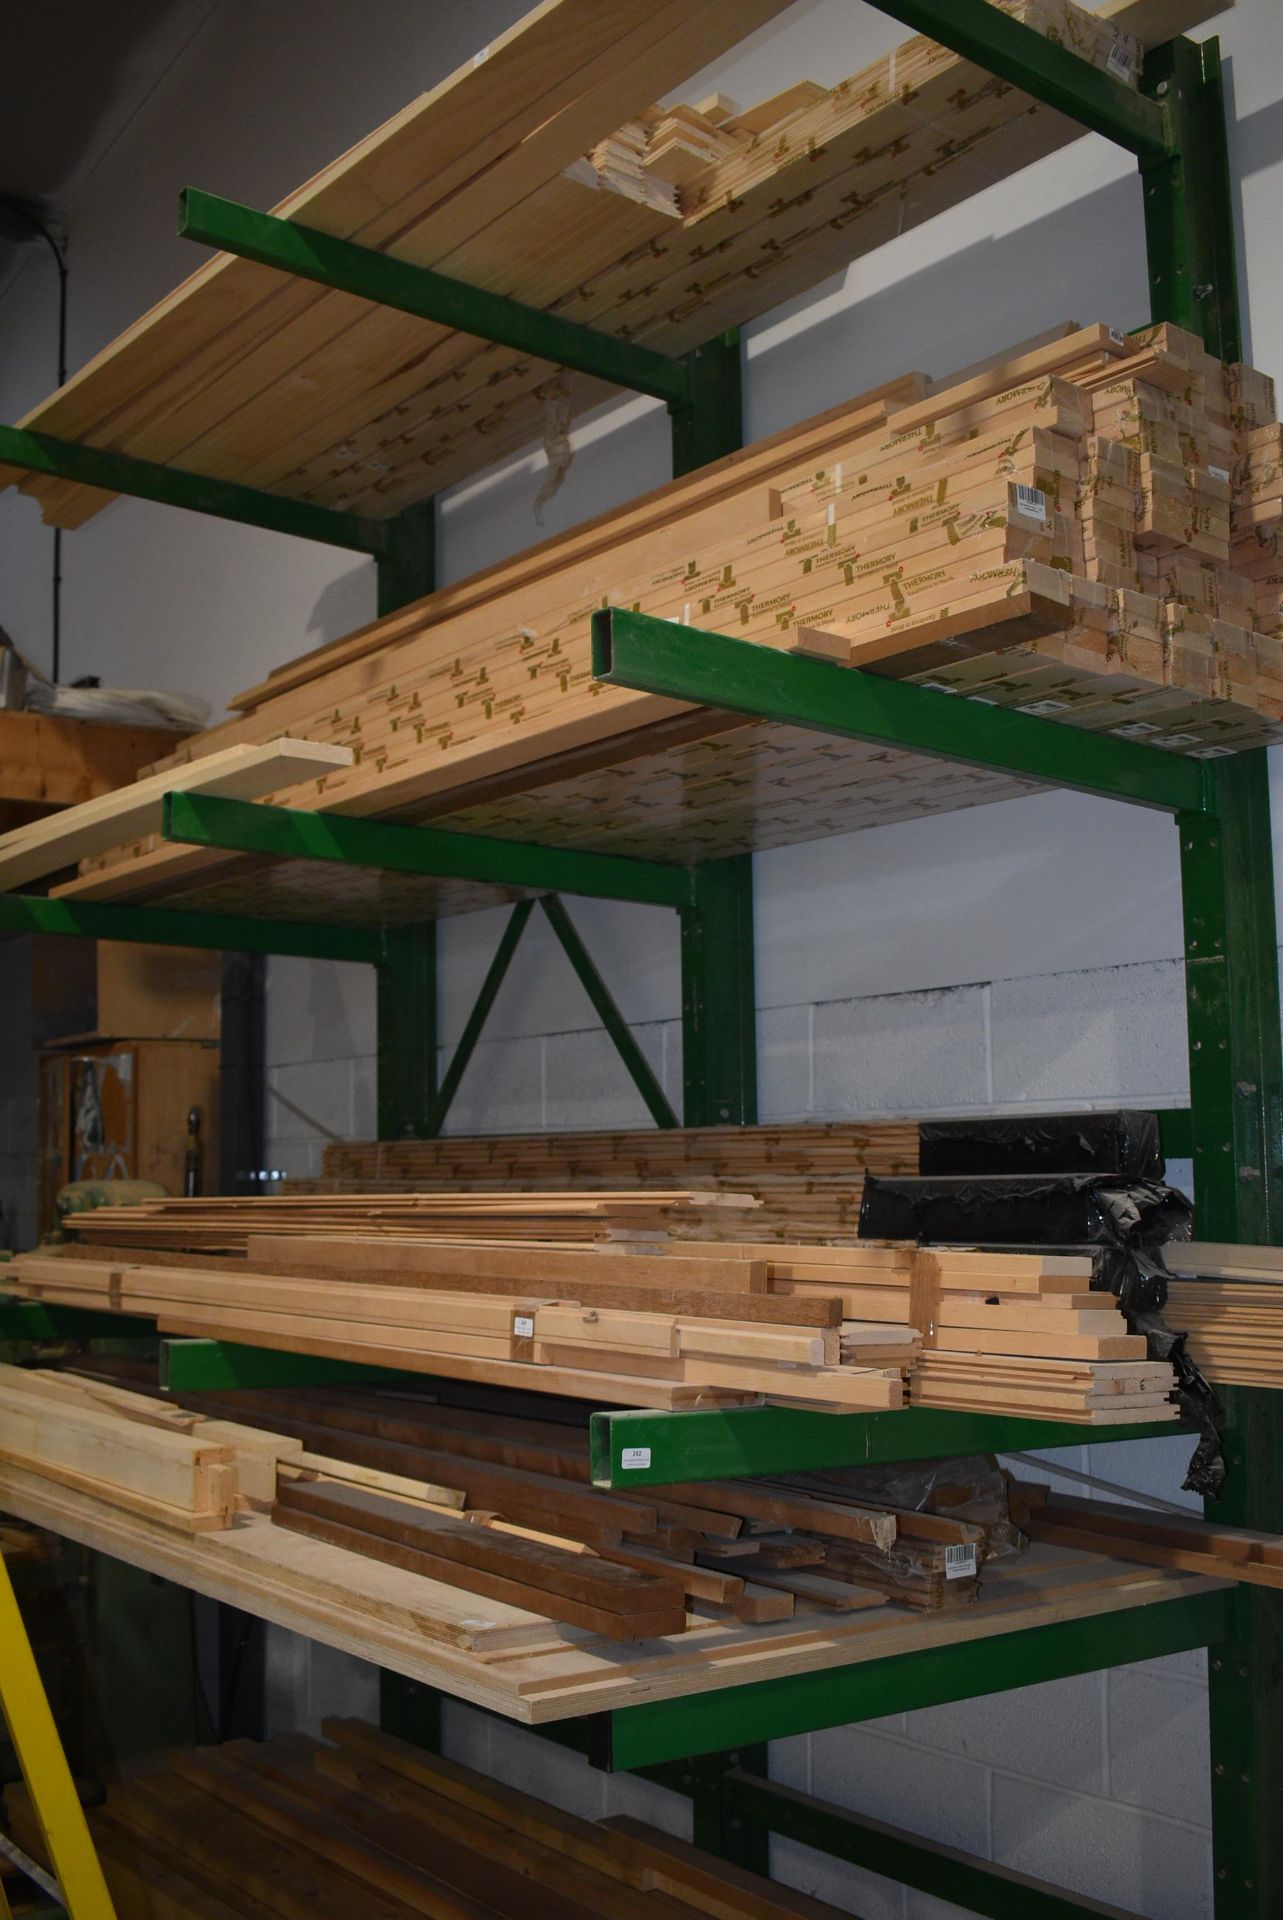 *Timber Racking 11.5ft tall x 8ft wide x 3.5ft deep Comprising Three Uprights and Twelve Beams (